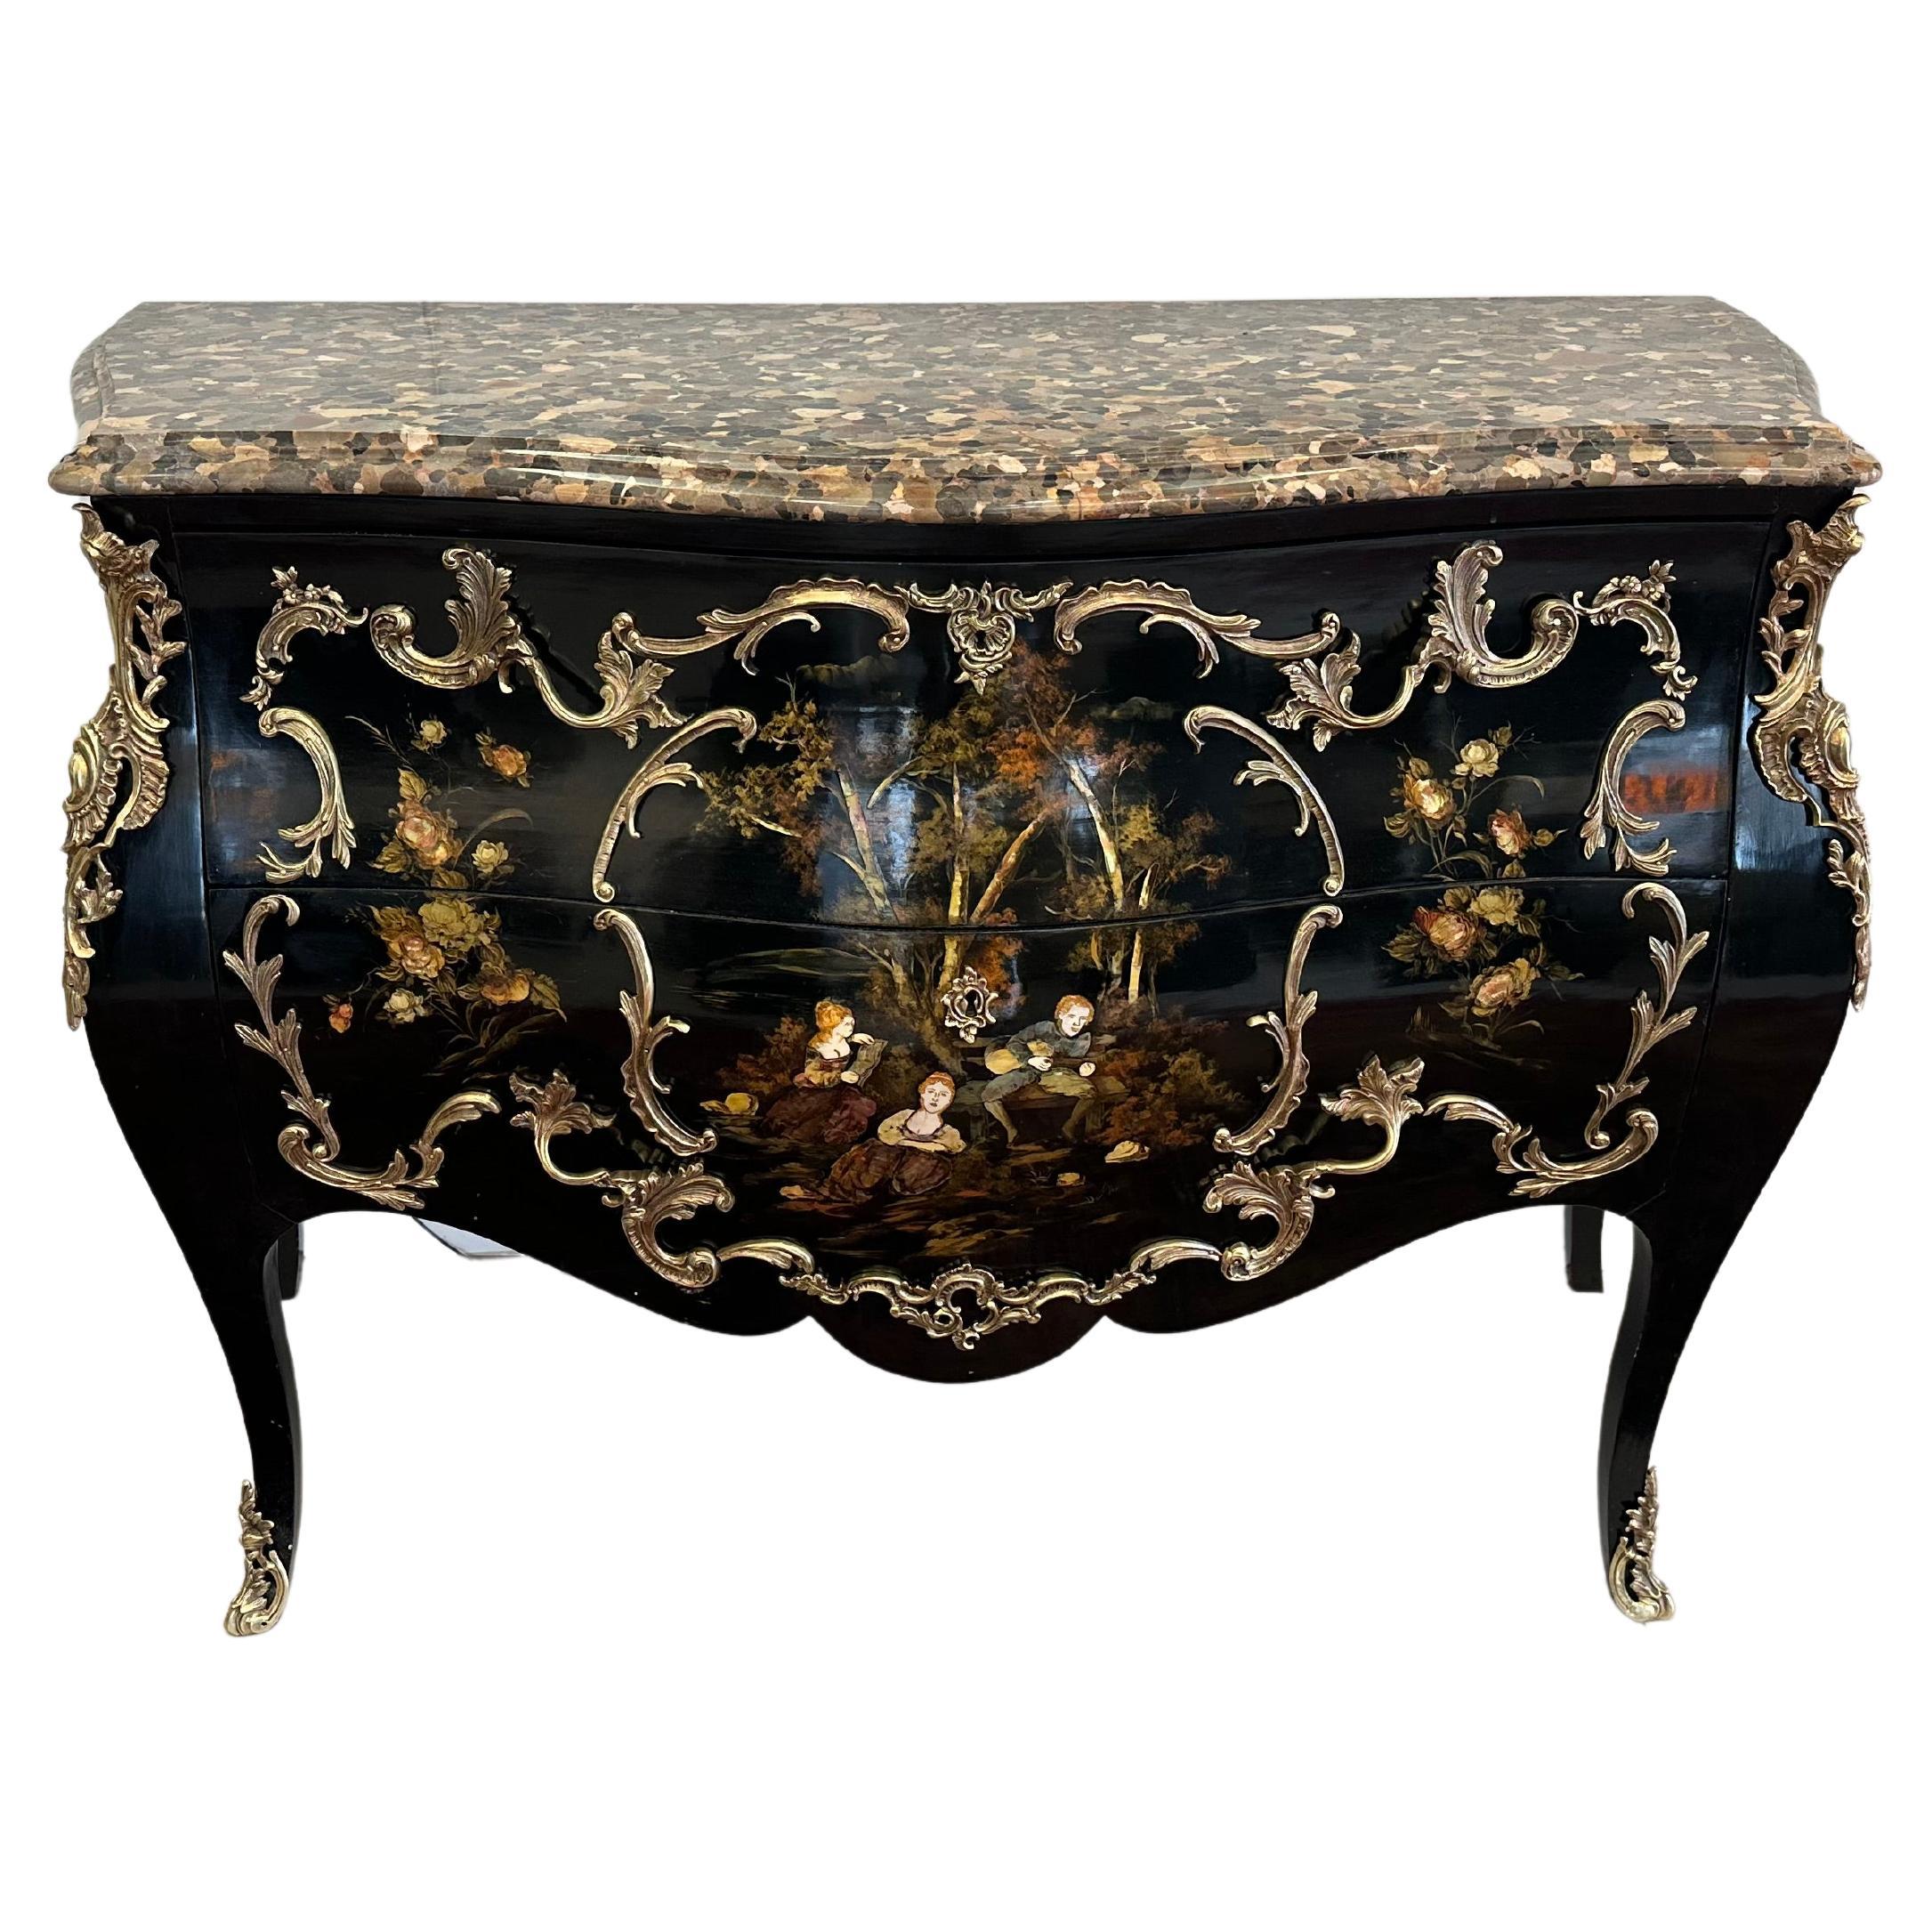 Louis XV Black ebonized commode, painted and marquetry different materials